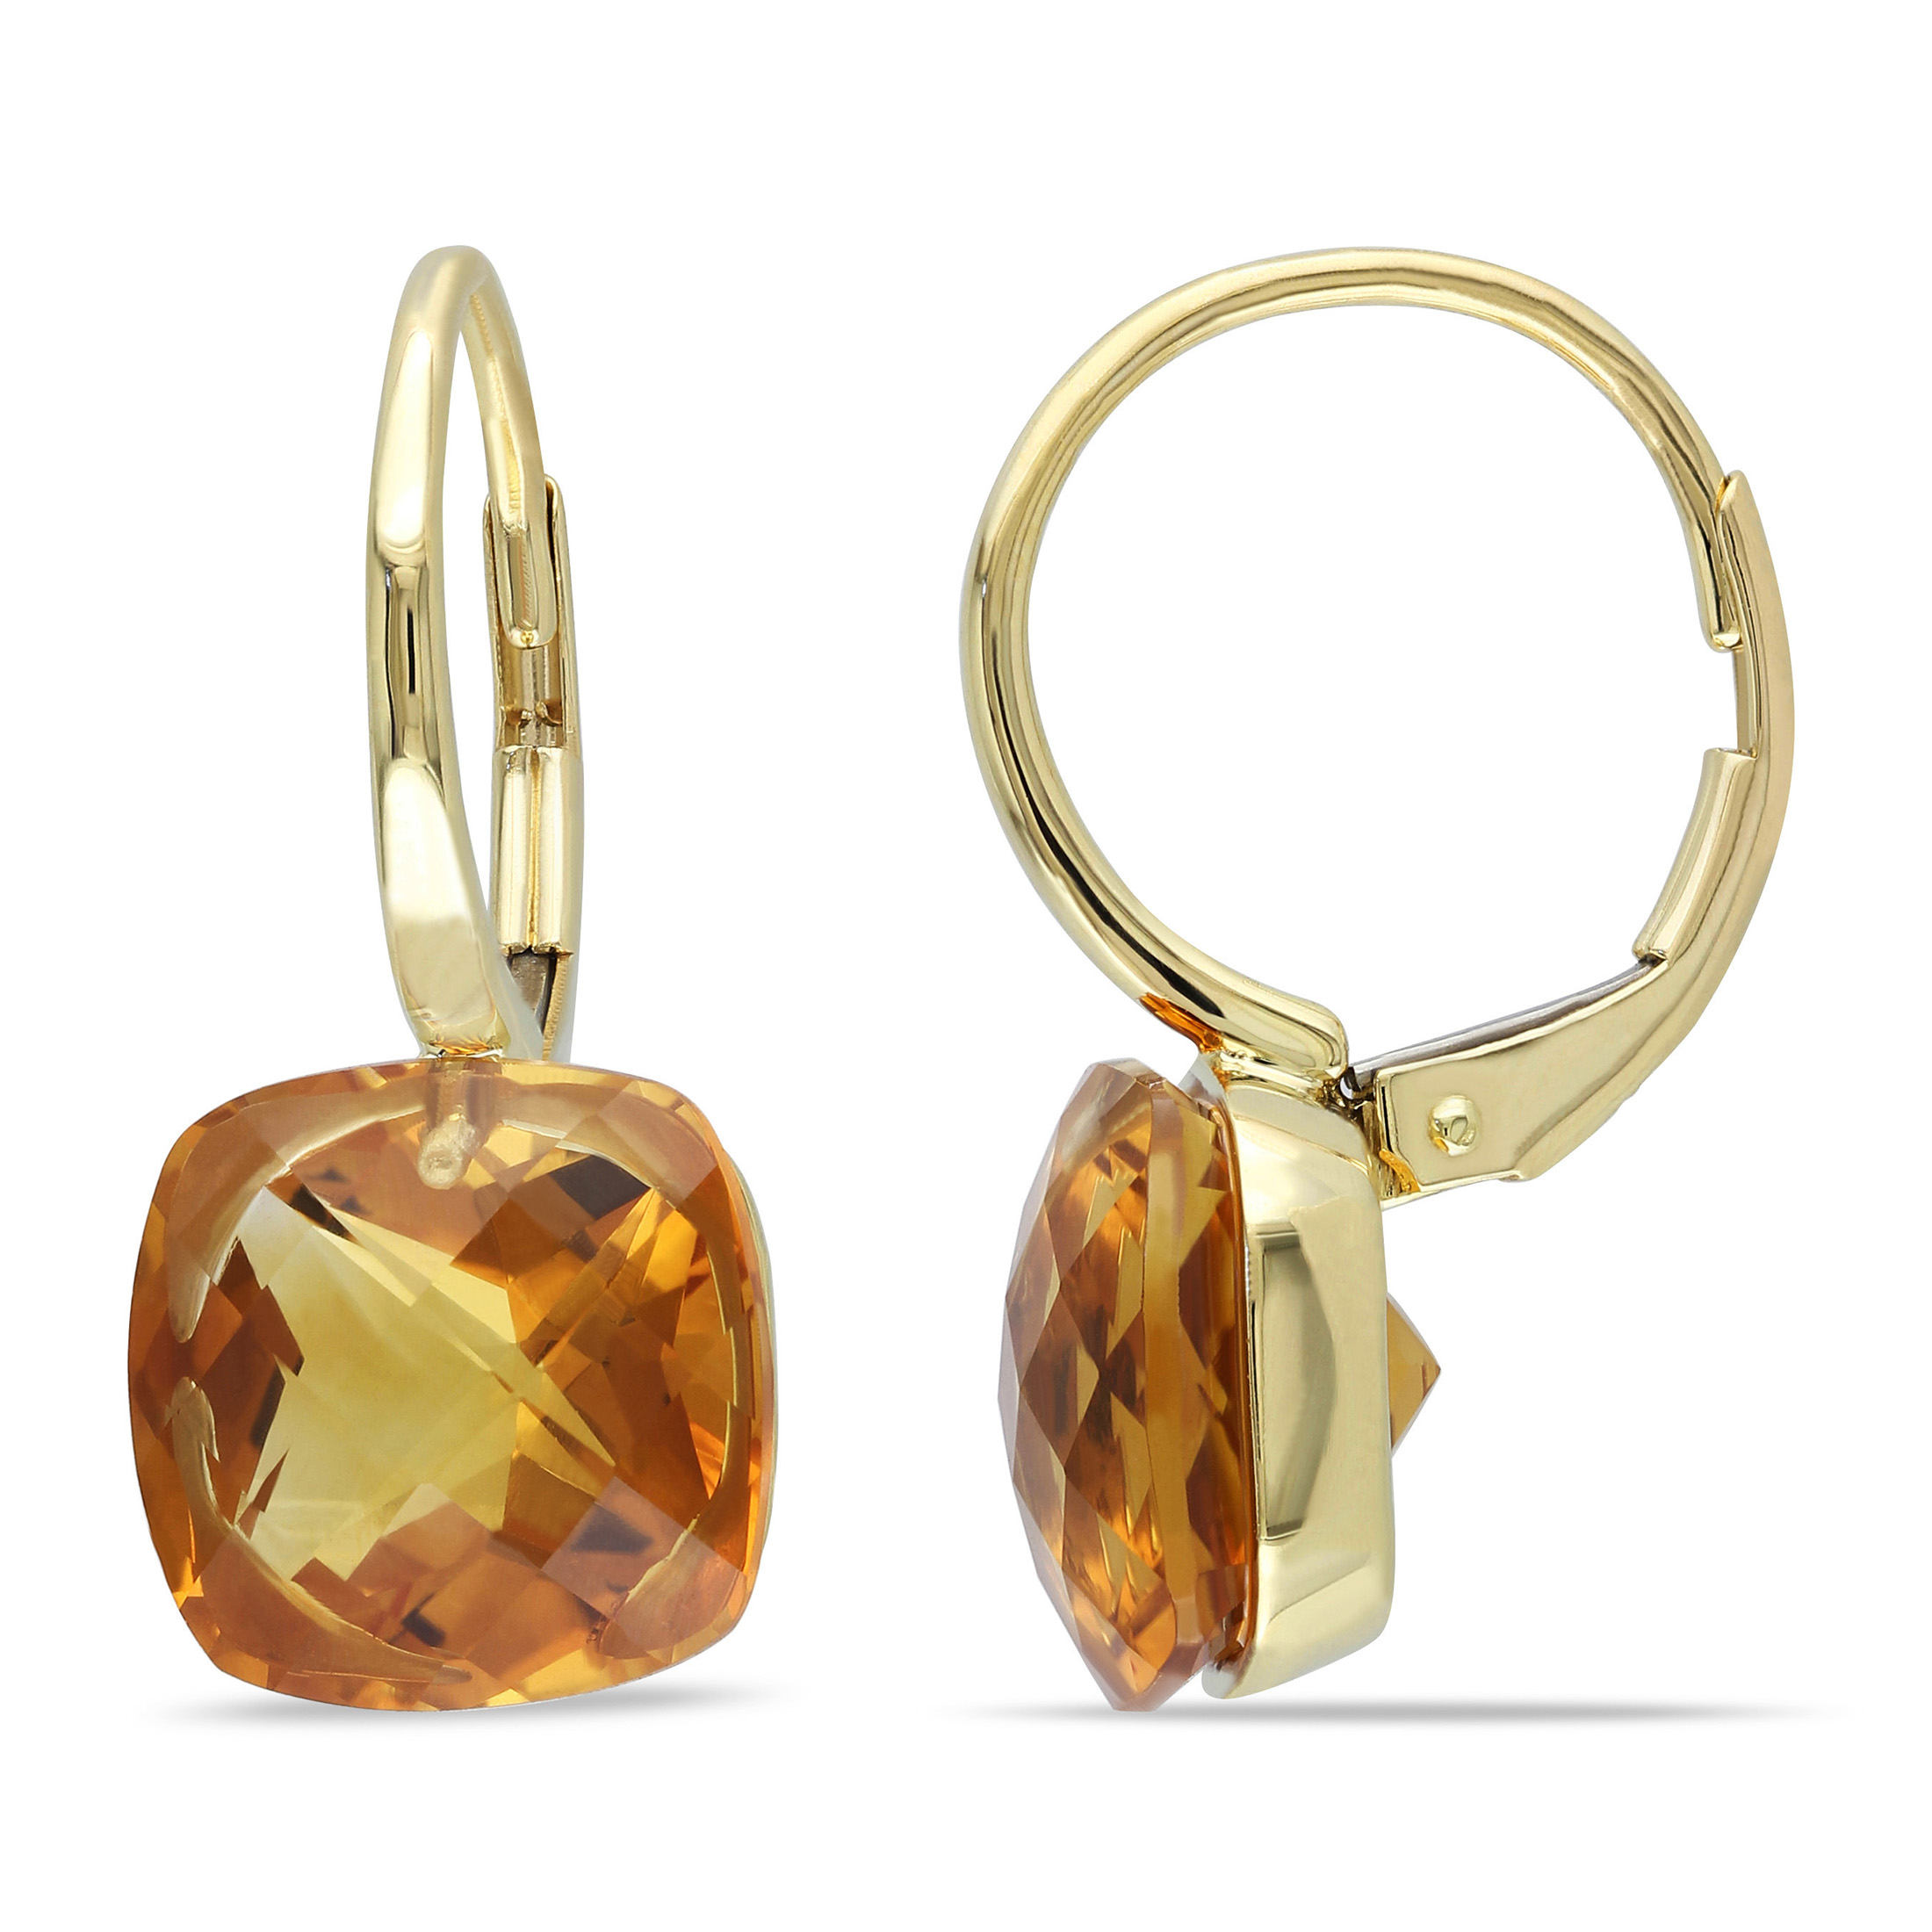 Miabella Women's 8 Carat T.G.W. Cushion-Cut Checkerboard Madeira Citrine 14kt Yellow Gold Leverback Earrings - image 1 of 6